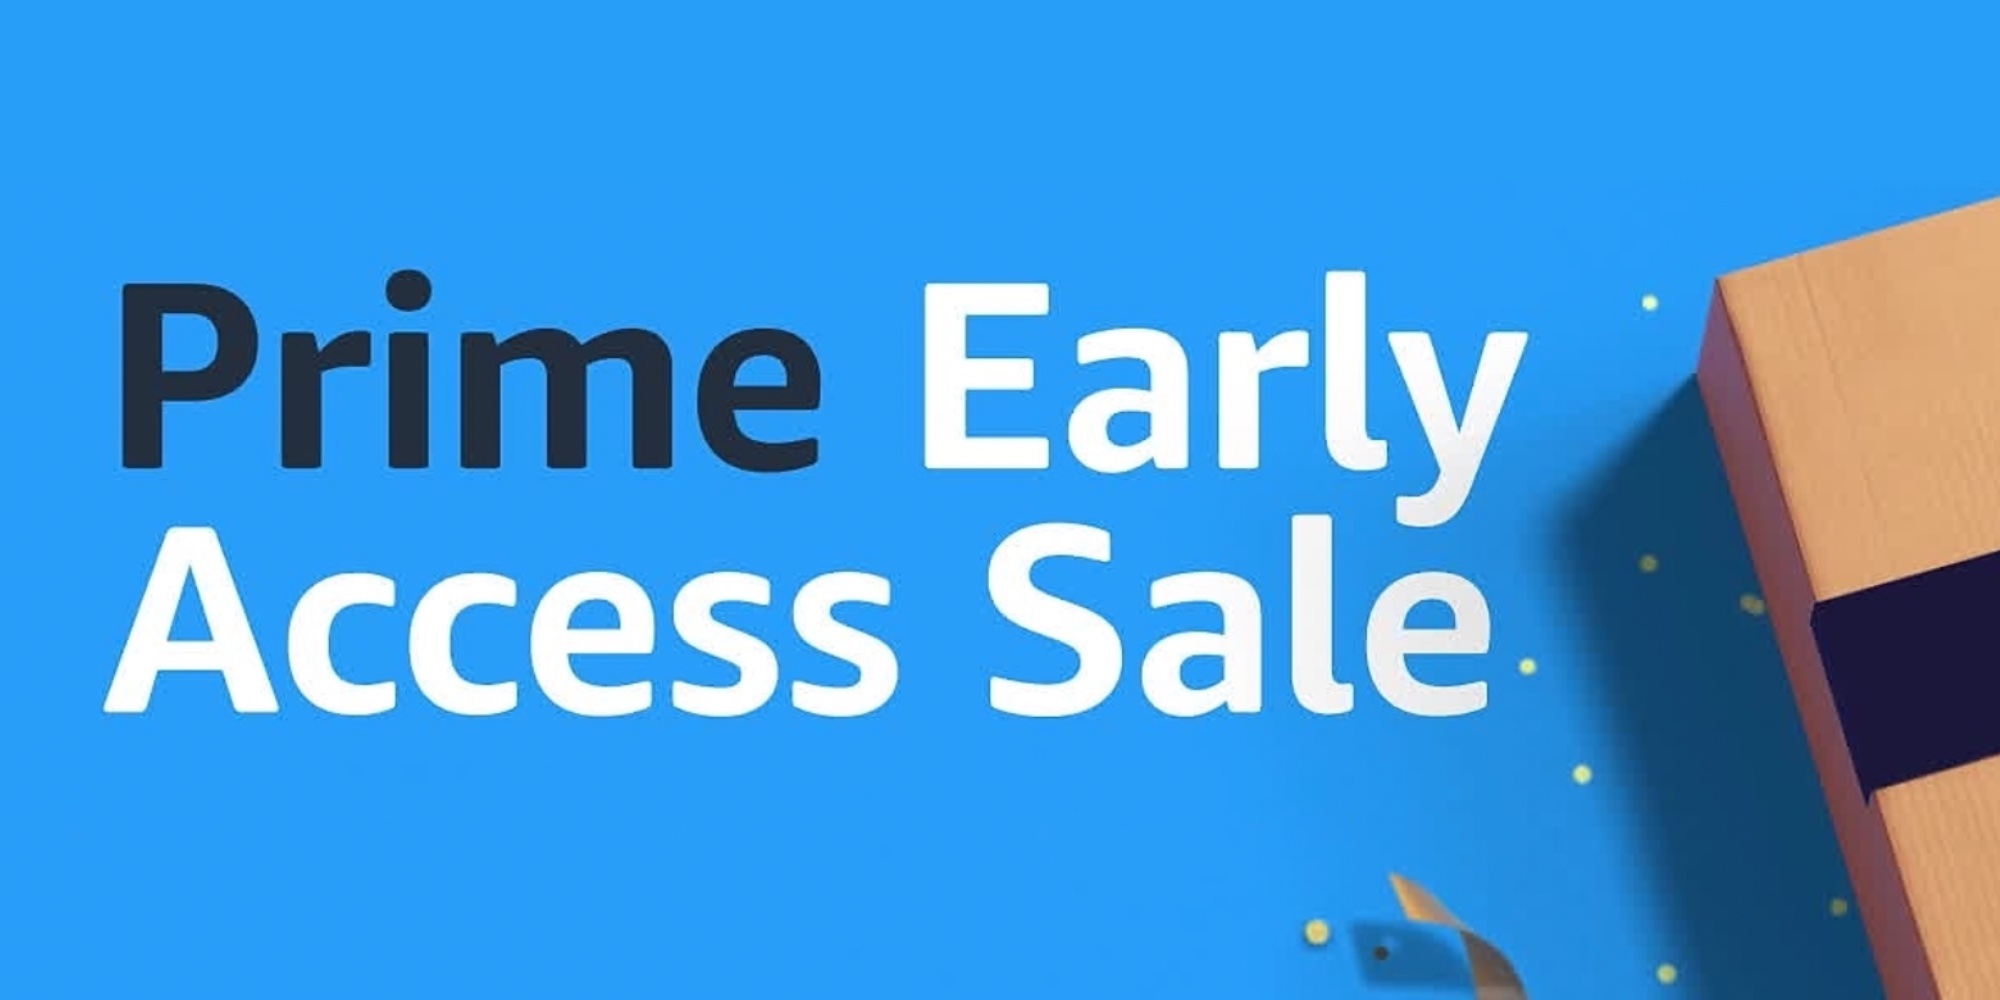 Did The  Prime Early Access Sale Live Up To Expectations